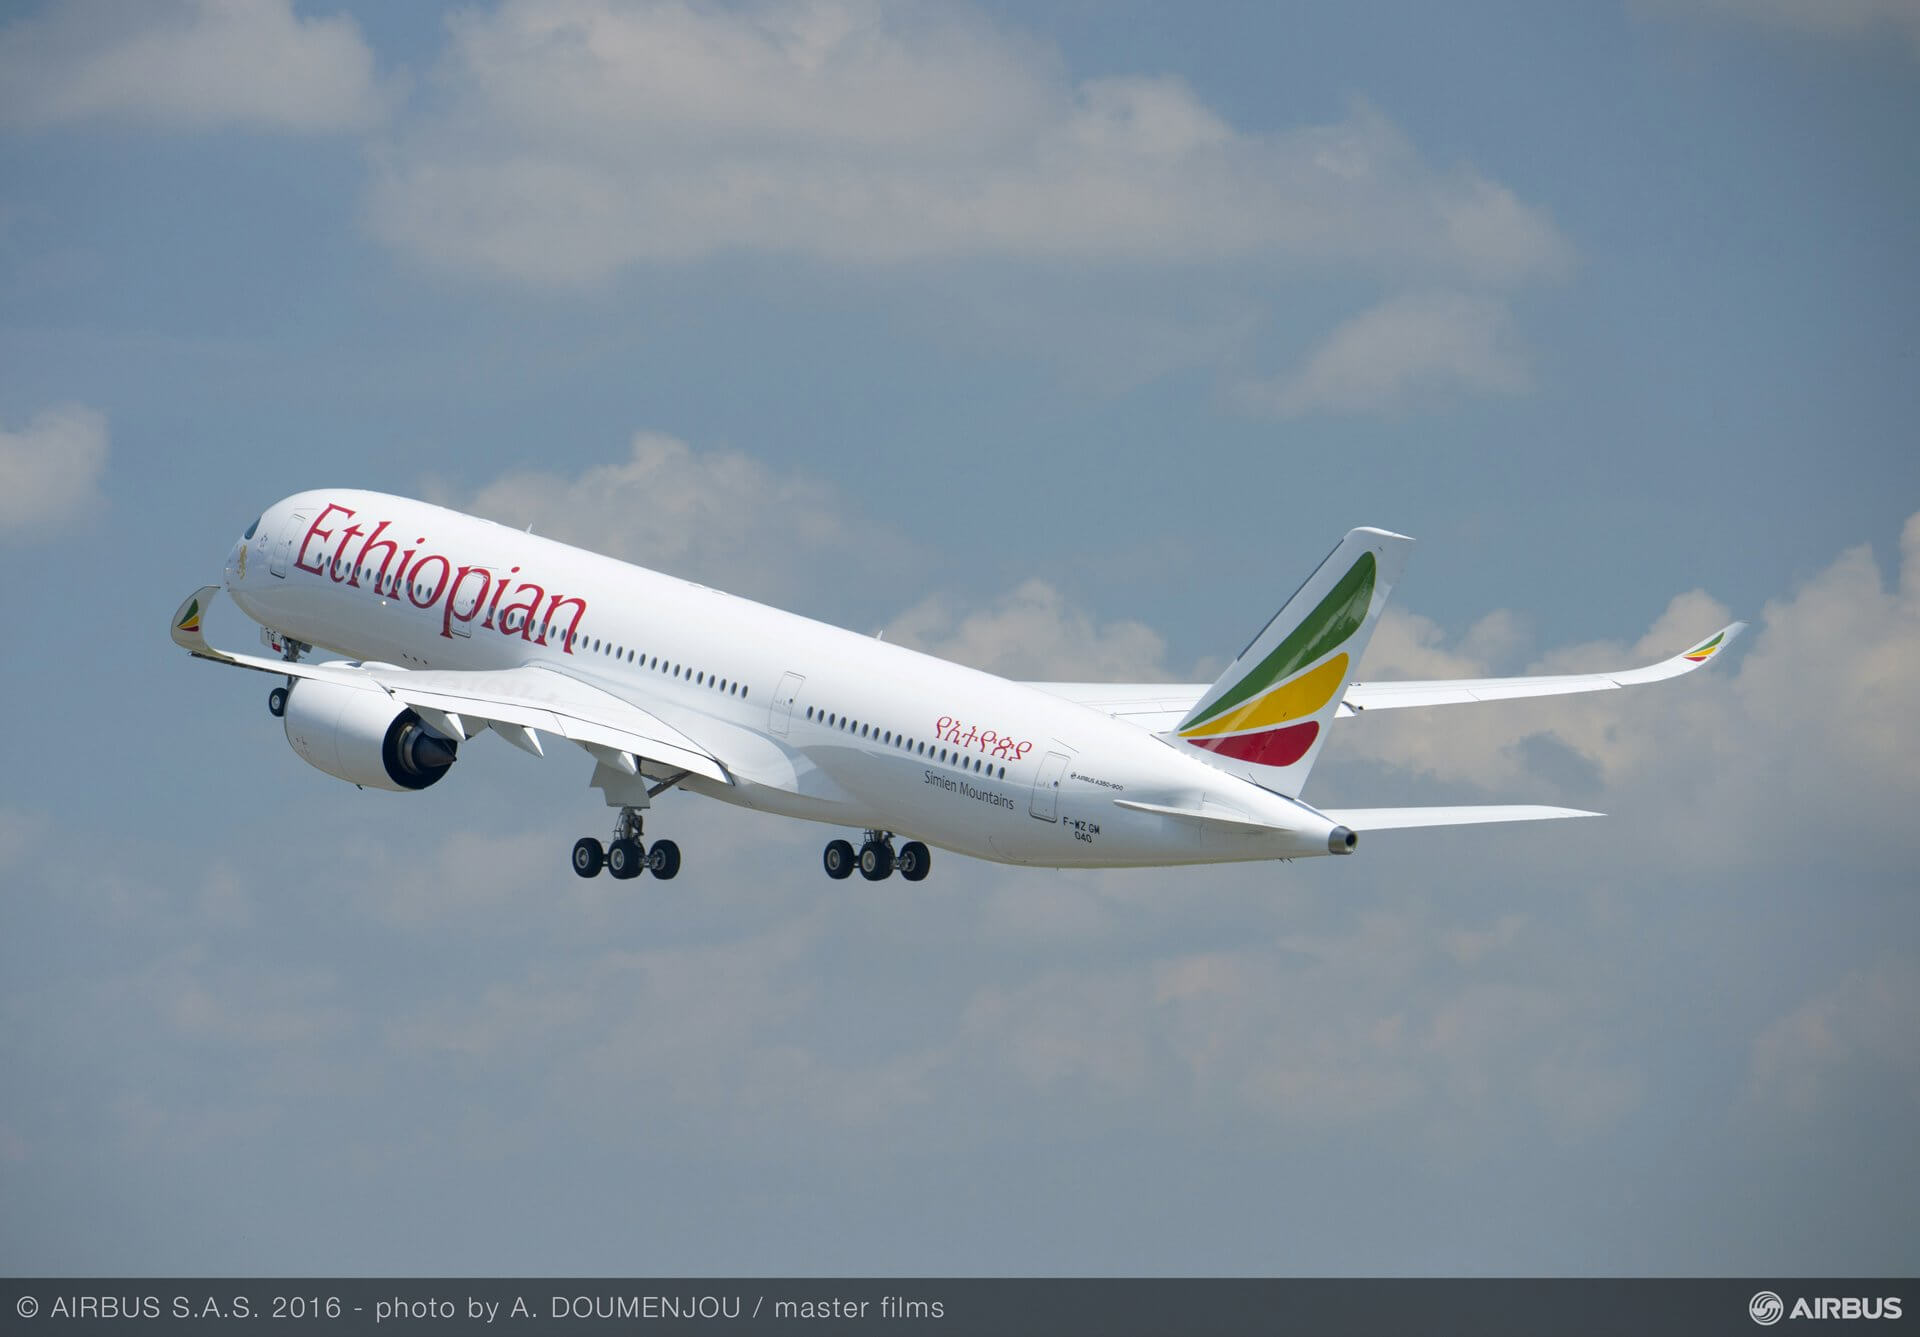 Ethiopian to Welcome Amman to its Extensive Network